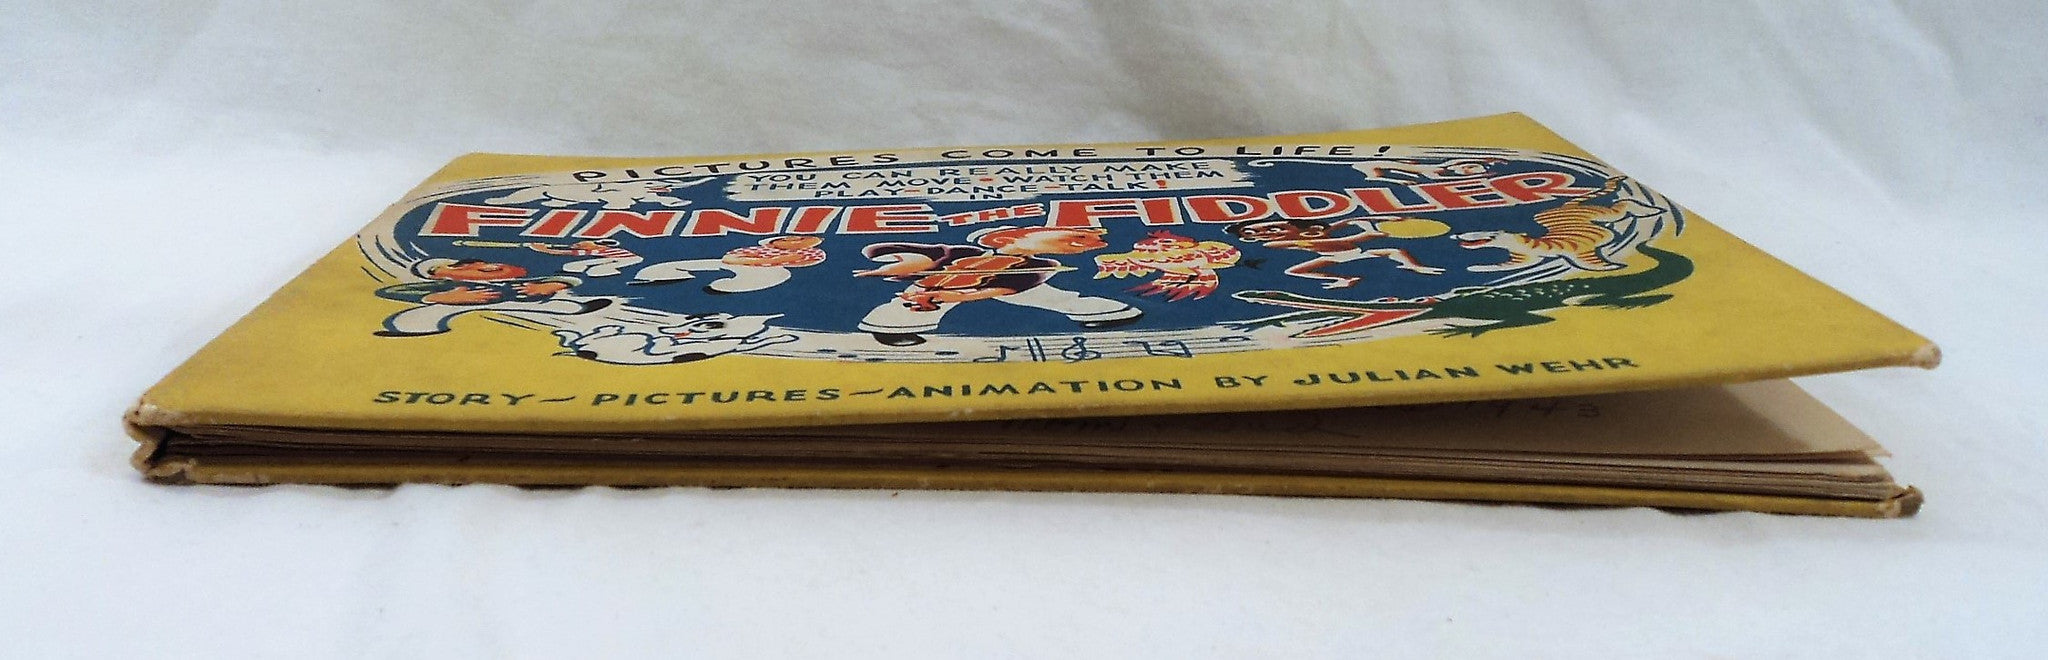 1942 Finnie The Fiddler Movable Animation Book